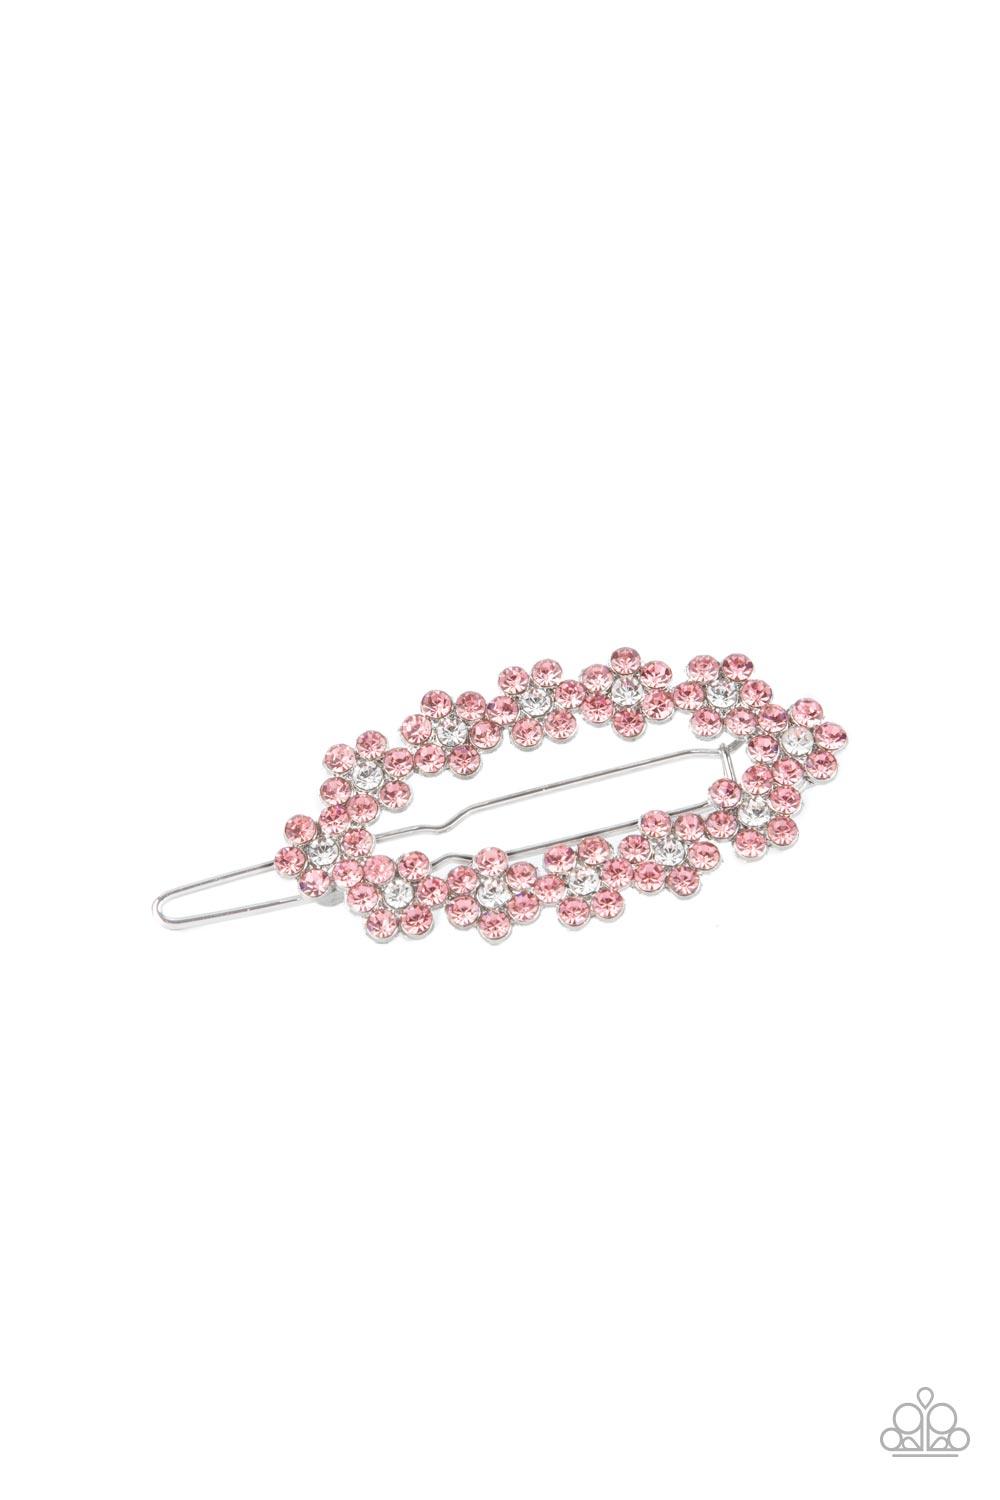 Gorgeously Garden Party Pink Hair Clip = Jewelry by Bretta